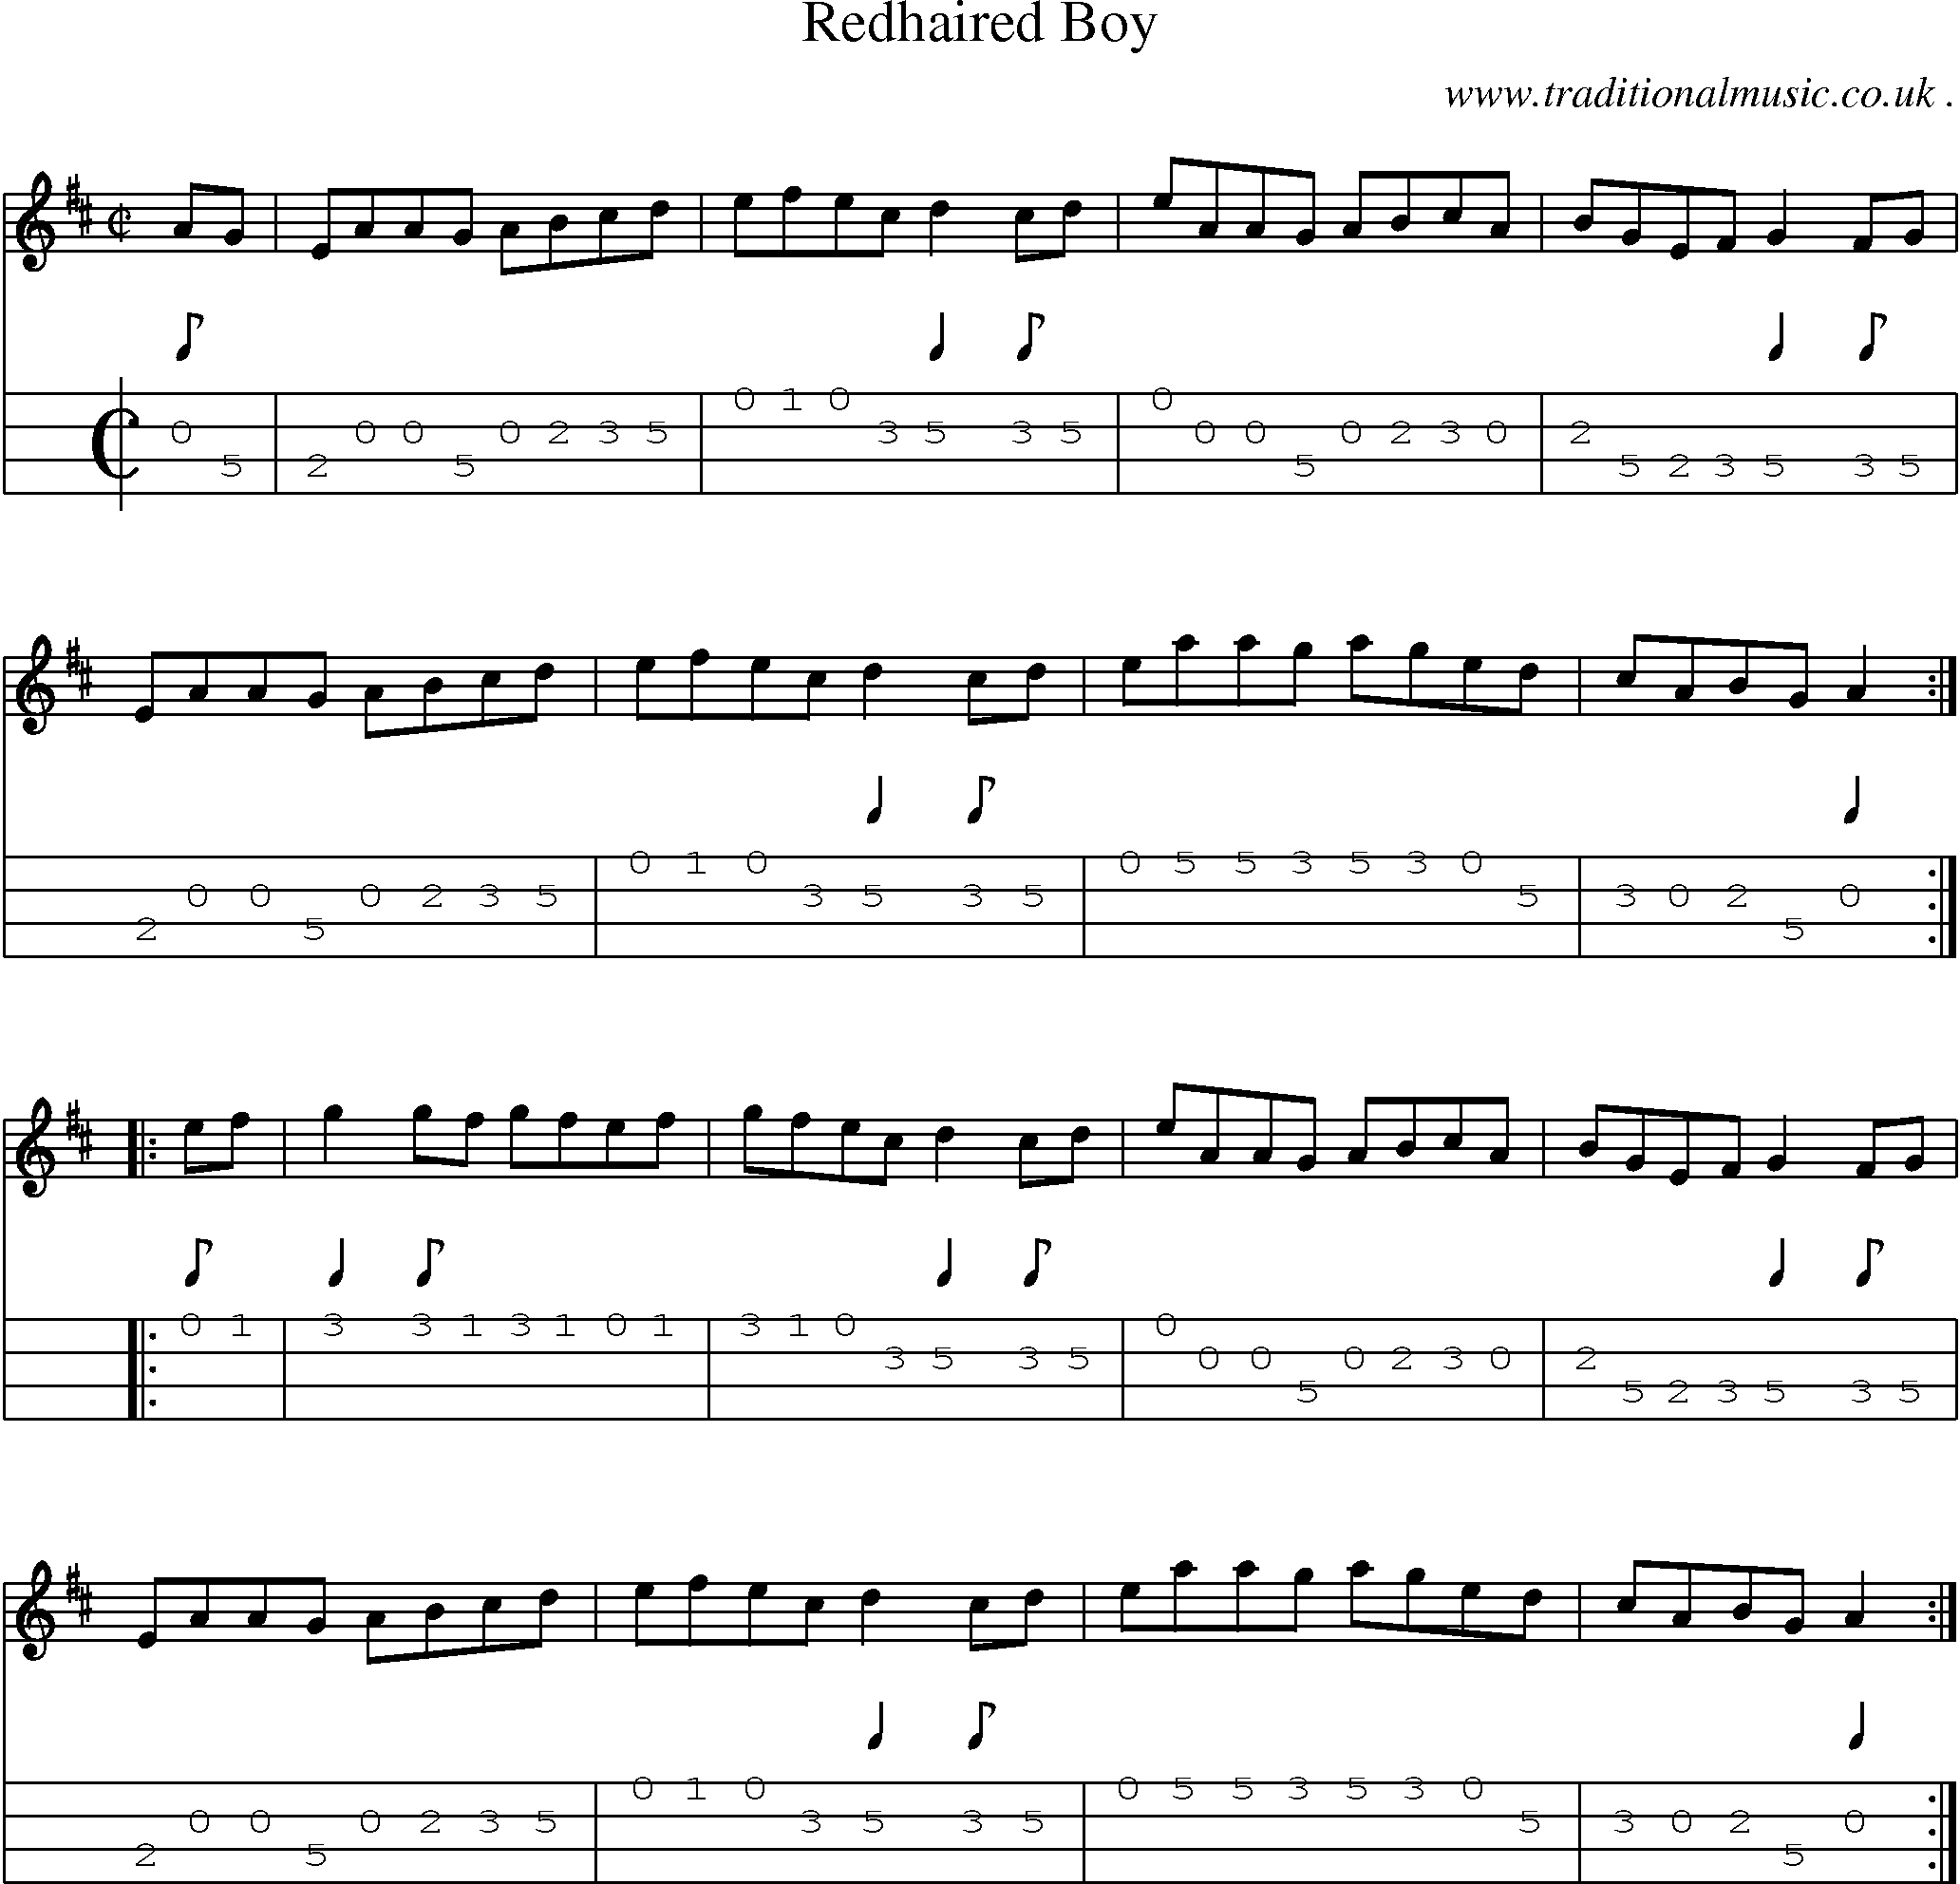 Sheet-Music and Mandolin Tabs for Redhaired Boy